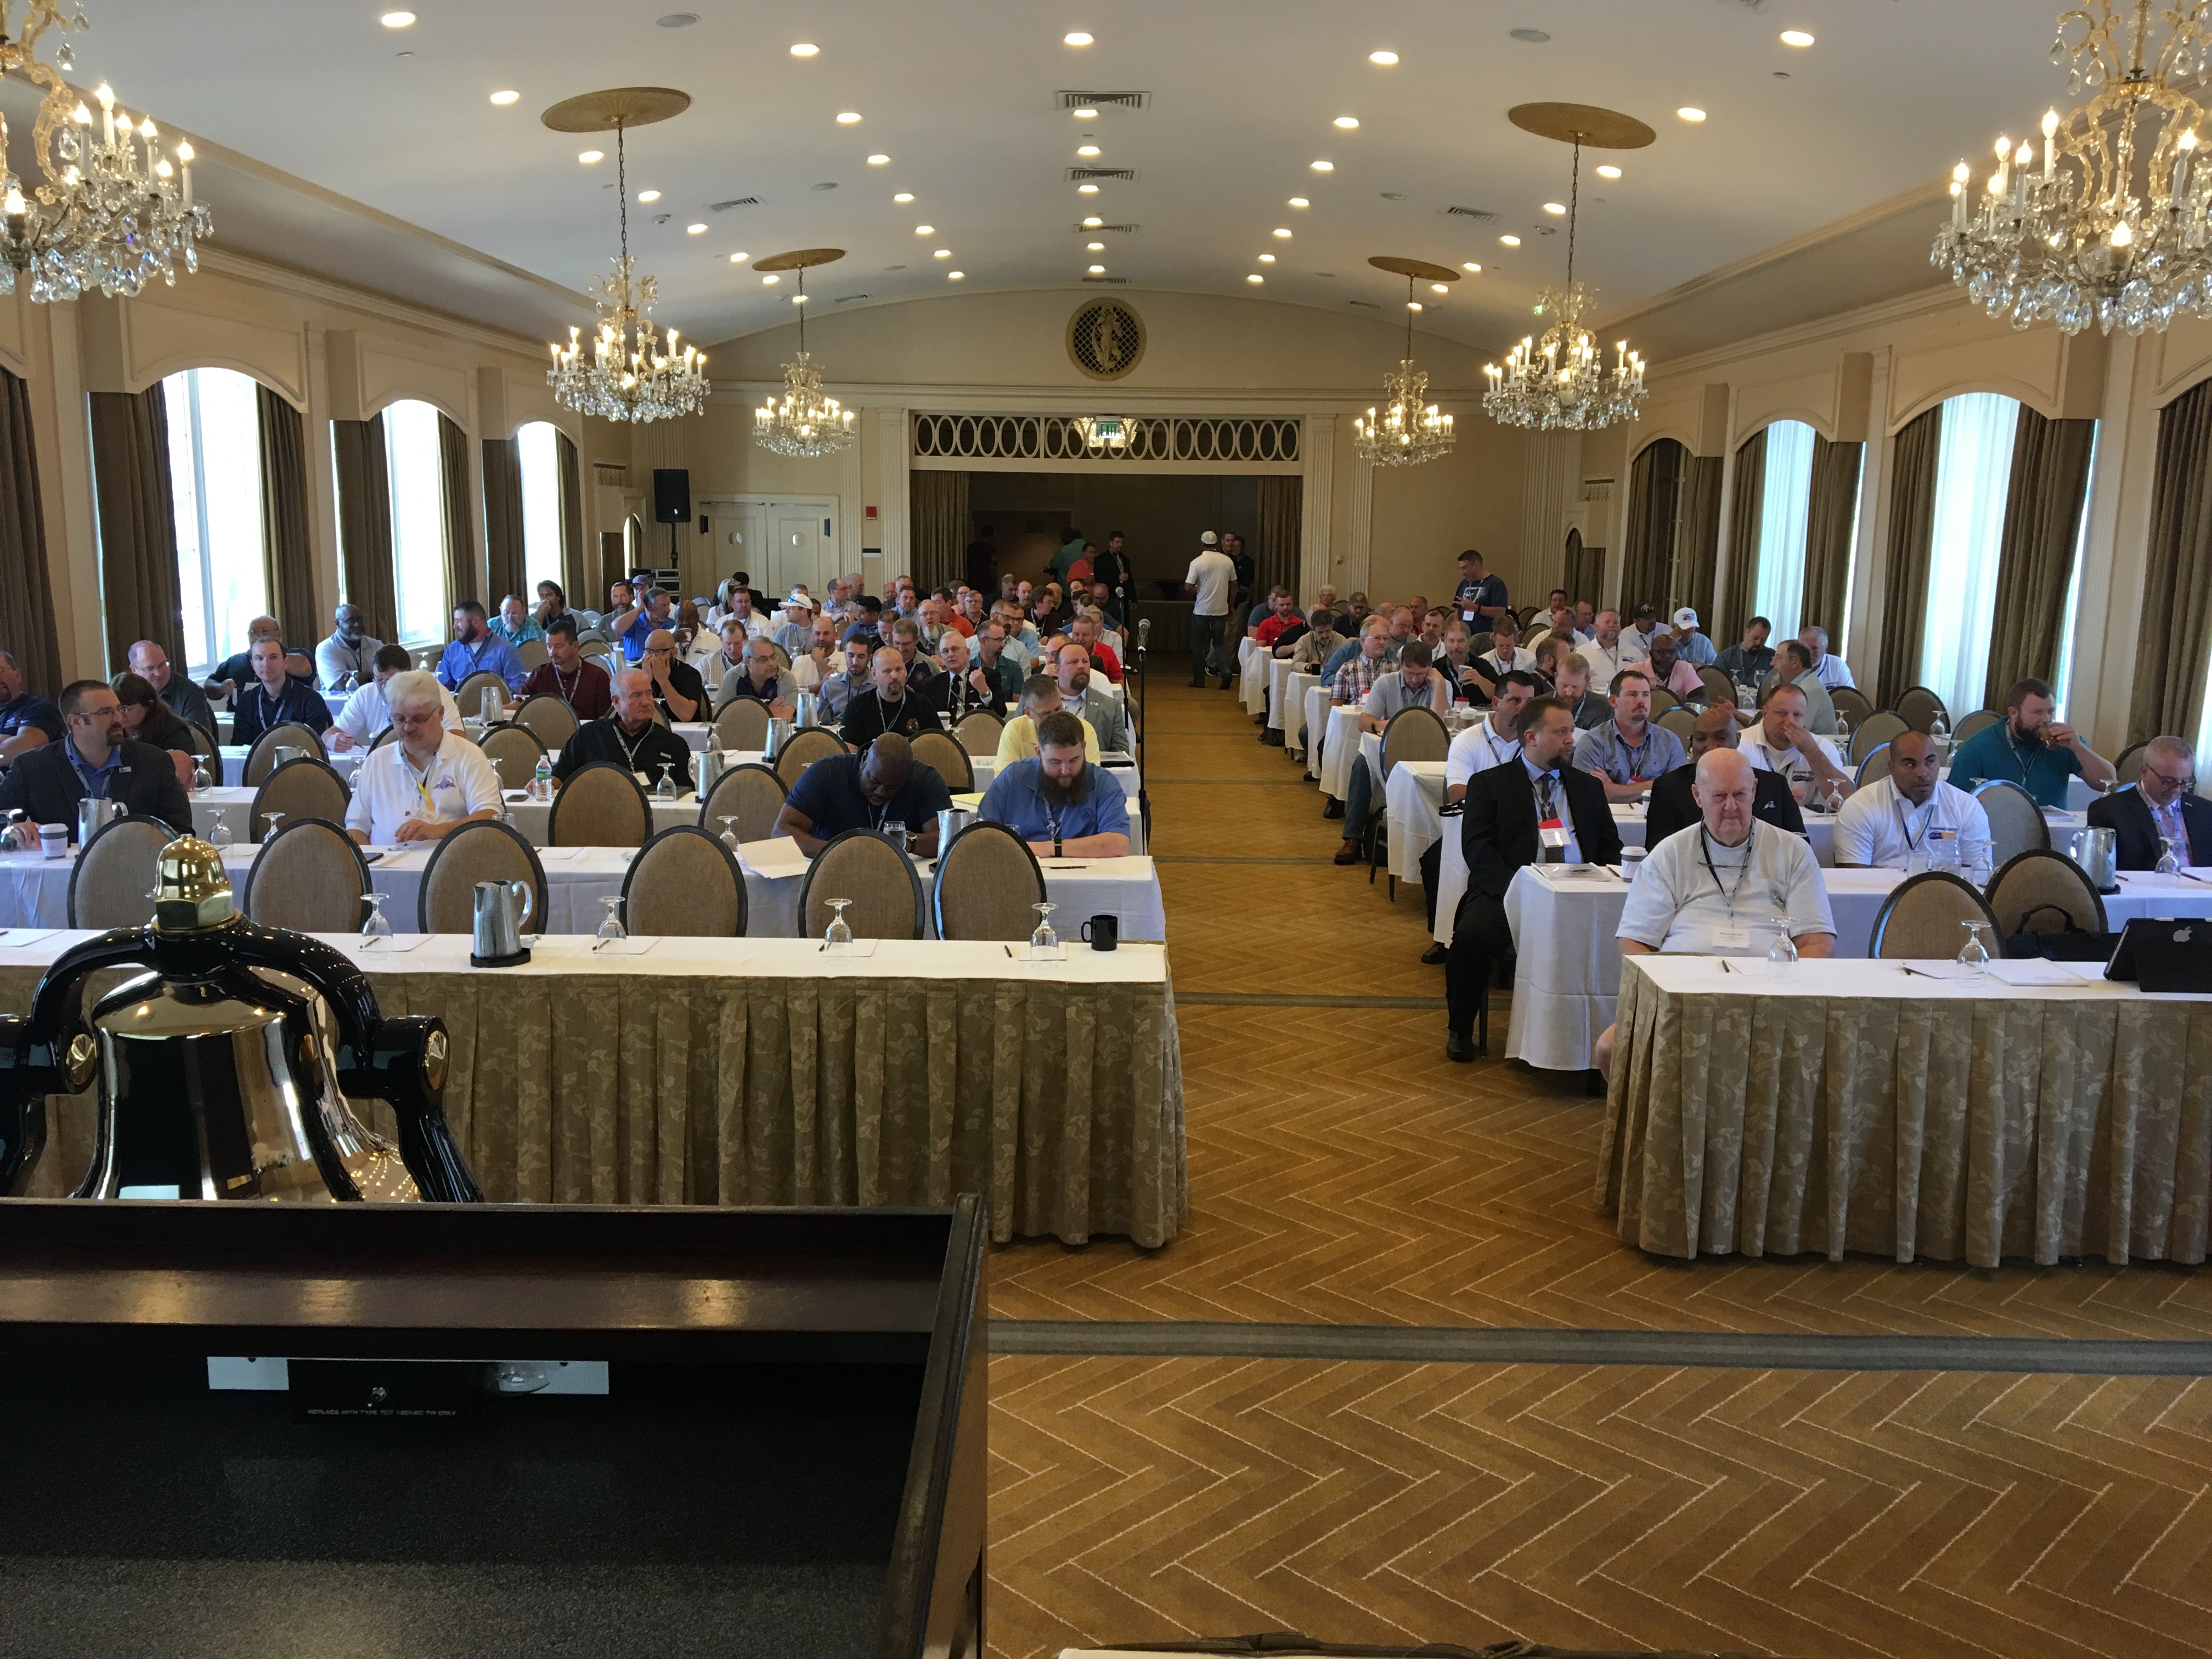 DL 19 Holds Its Eighth Quadrennial Convention